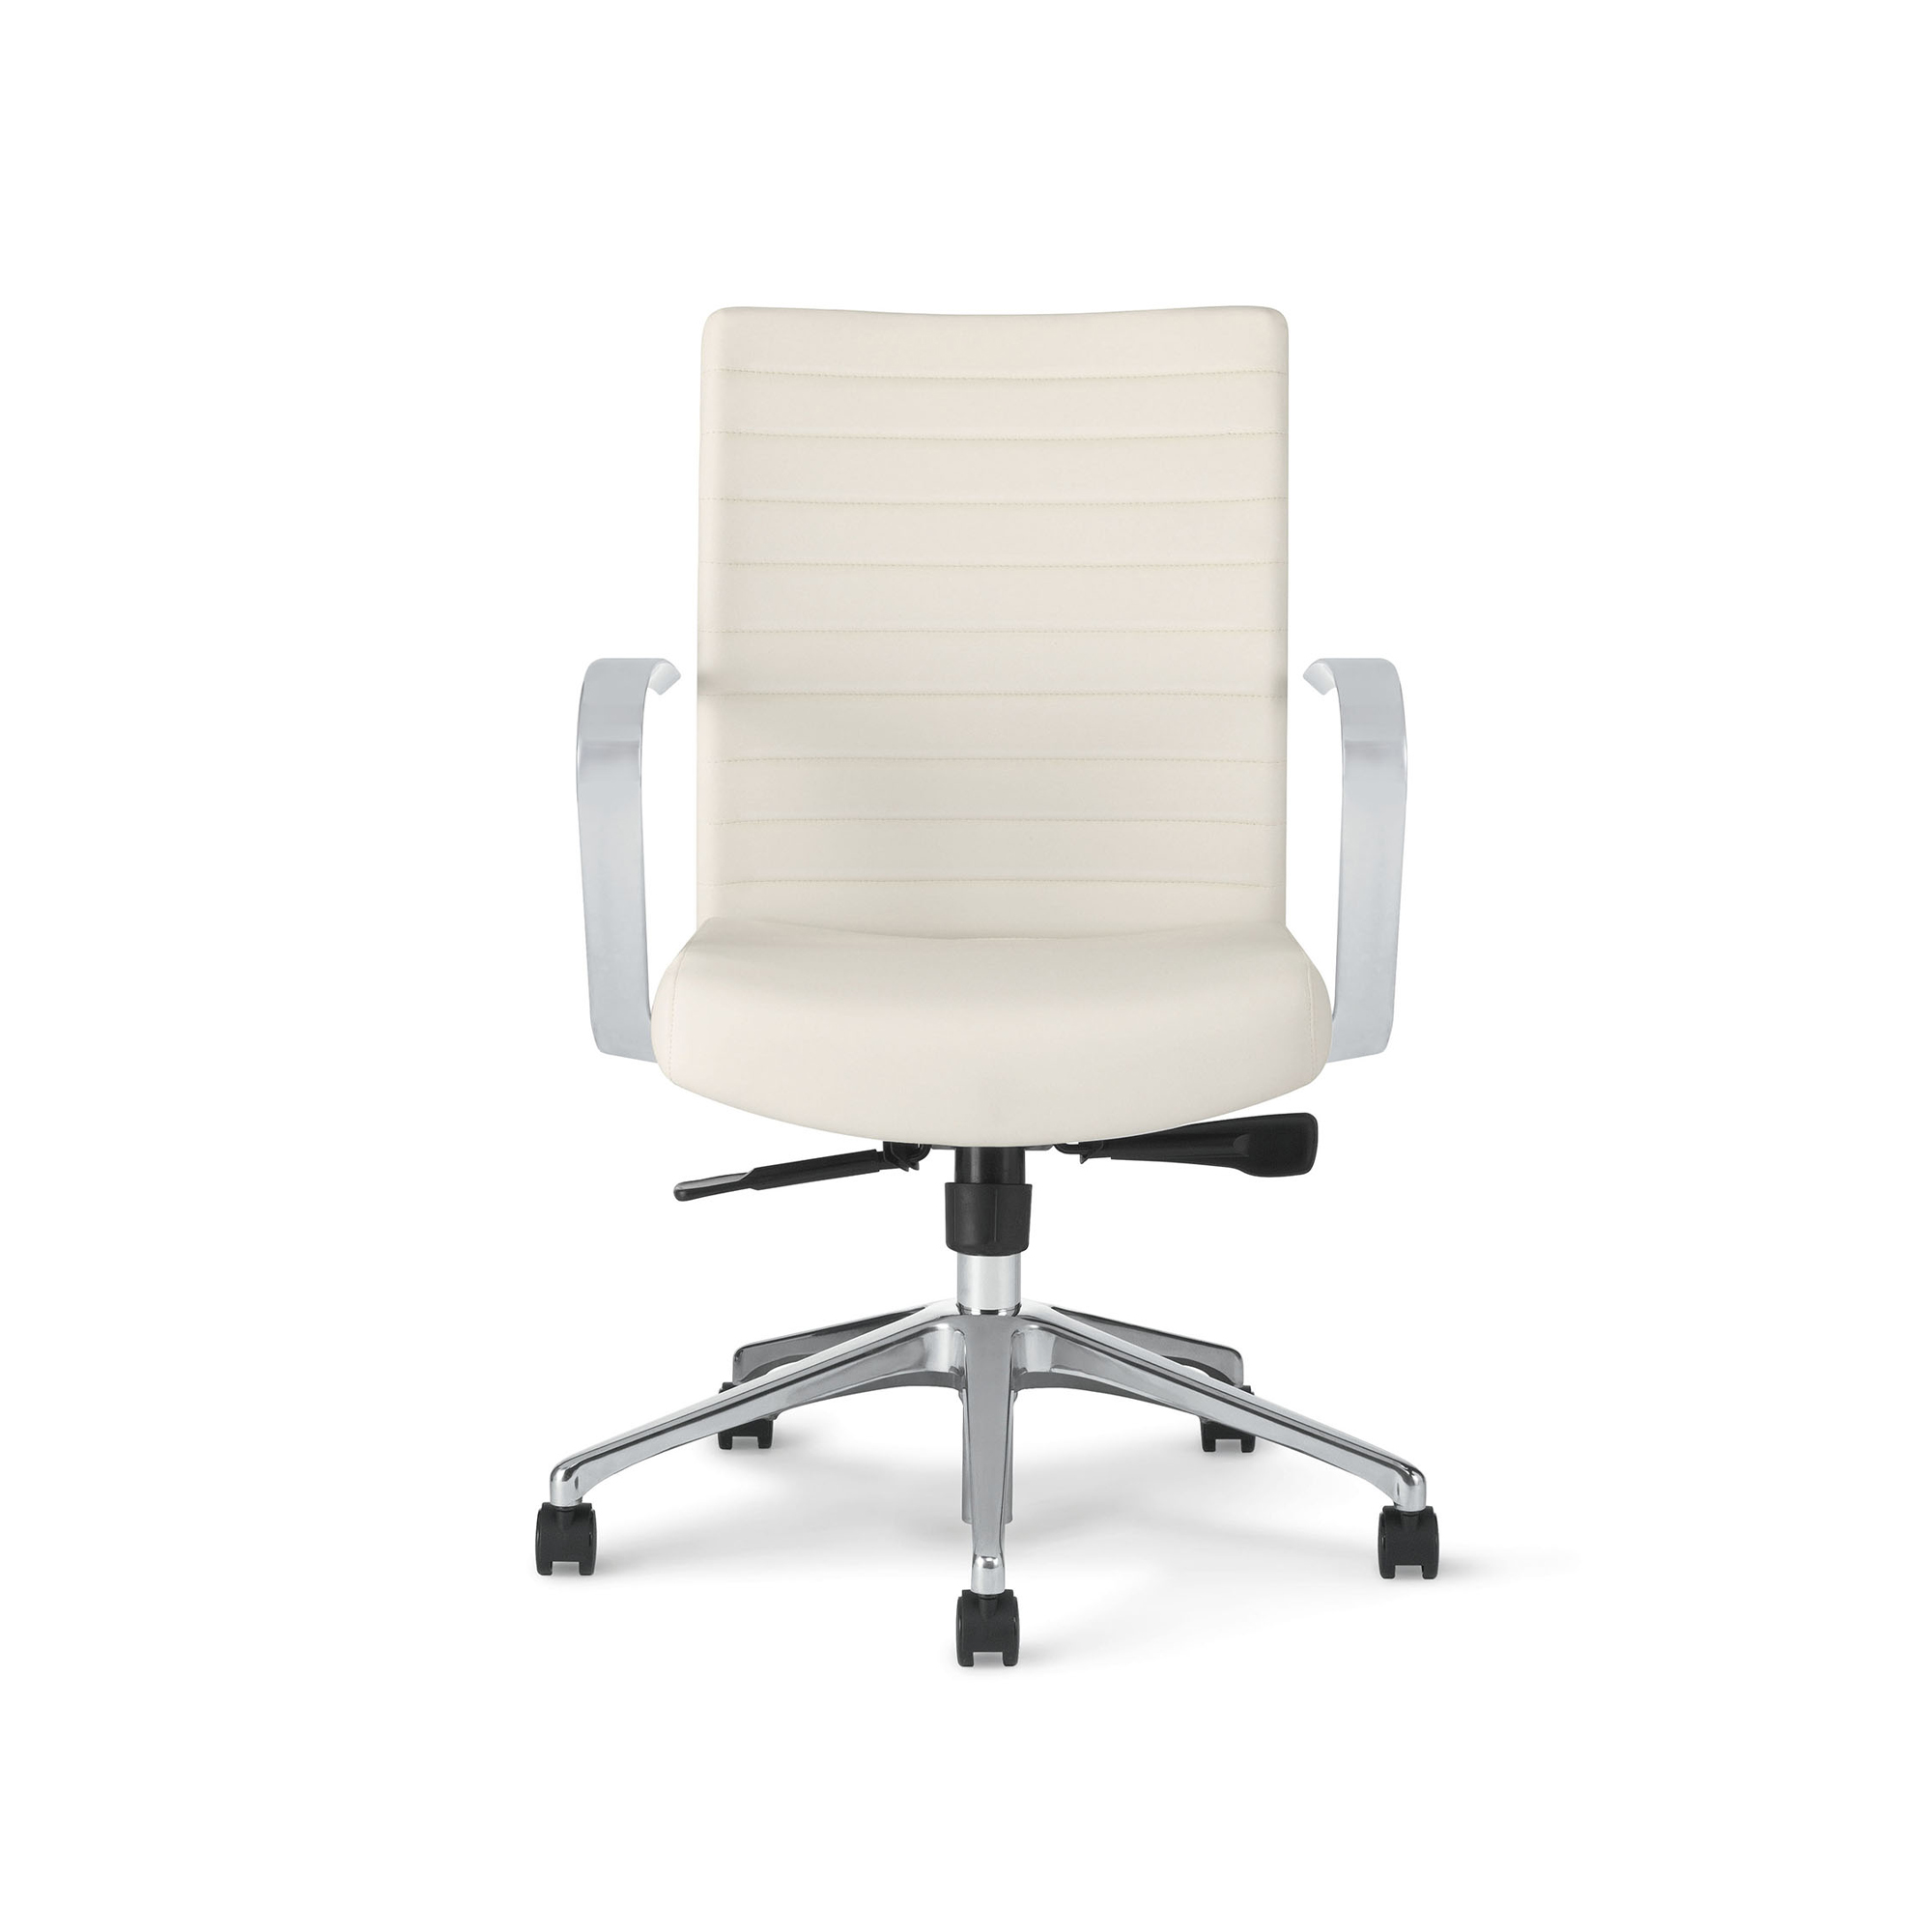 Memento Executive/Conference Chair, Cantilever Arms, Front View